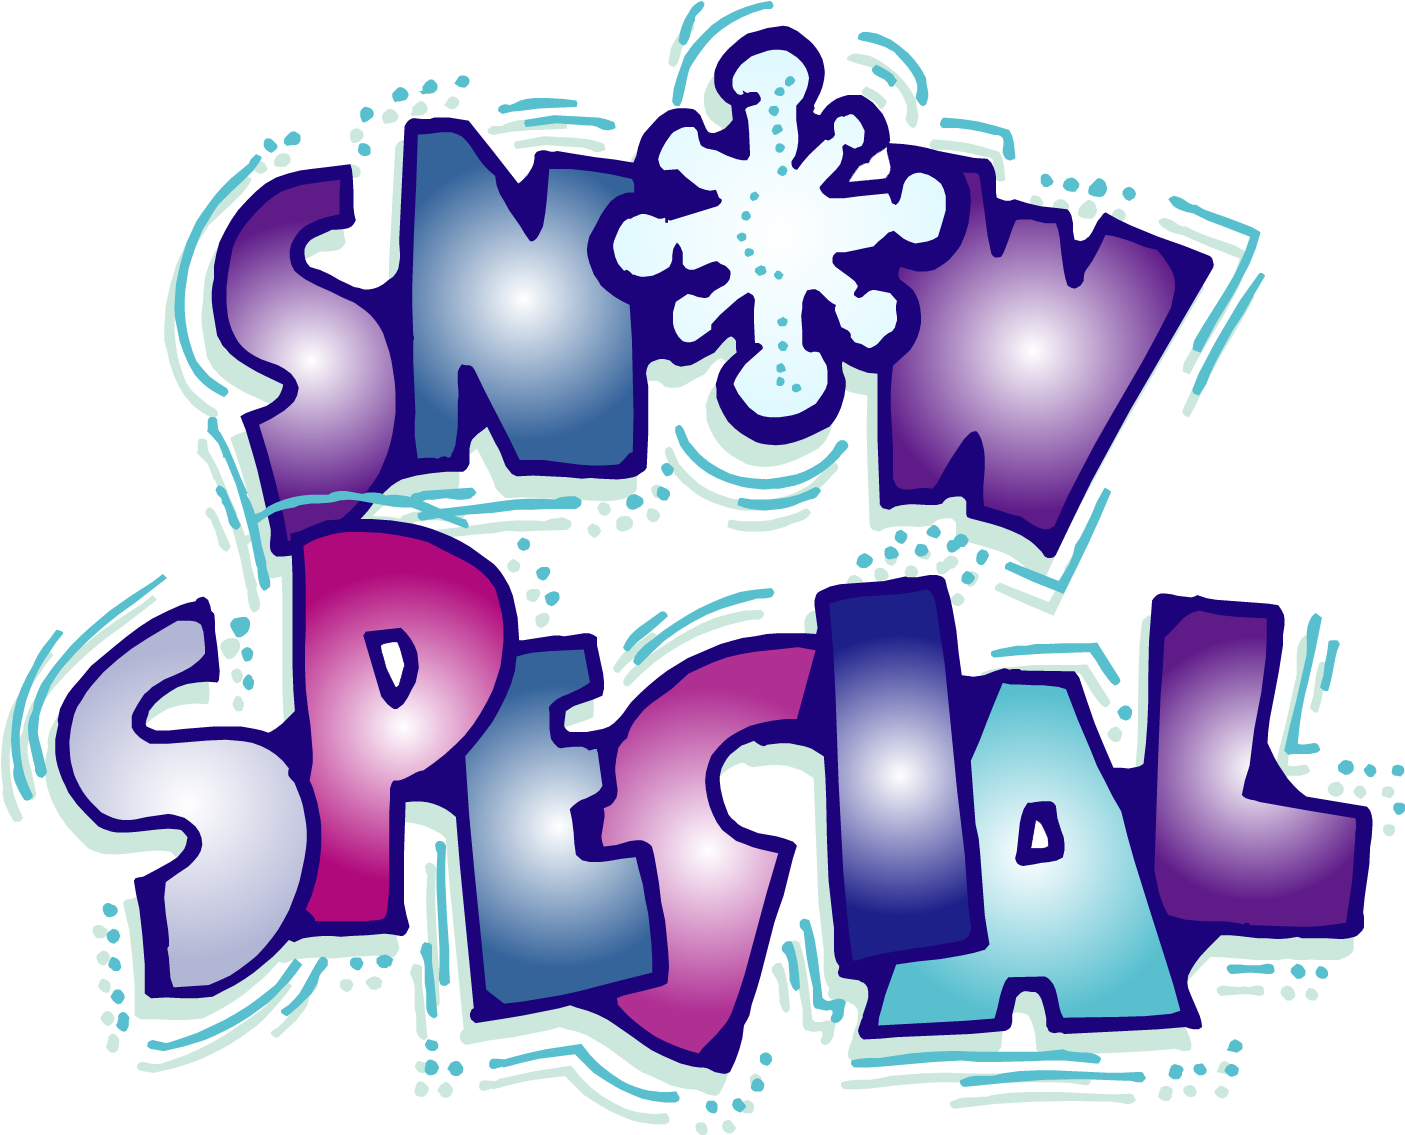 A Colorful Text With A Snowflake